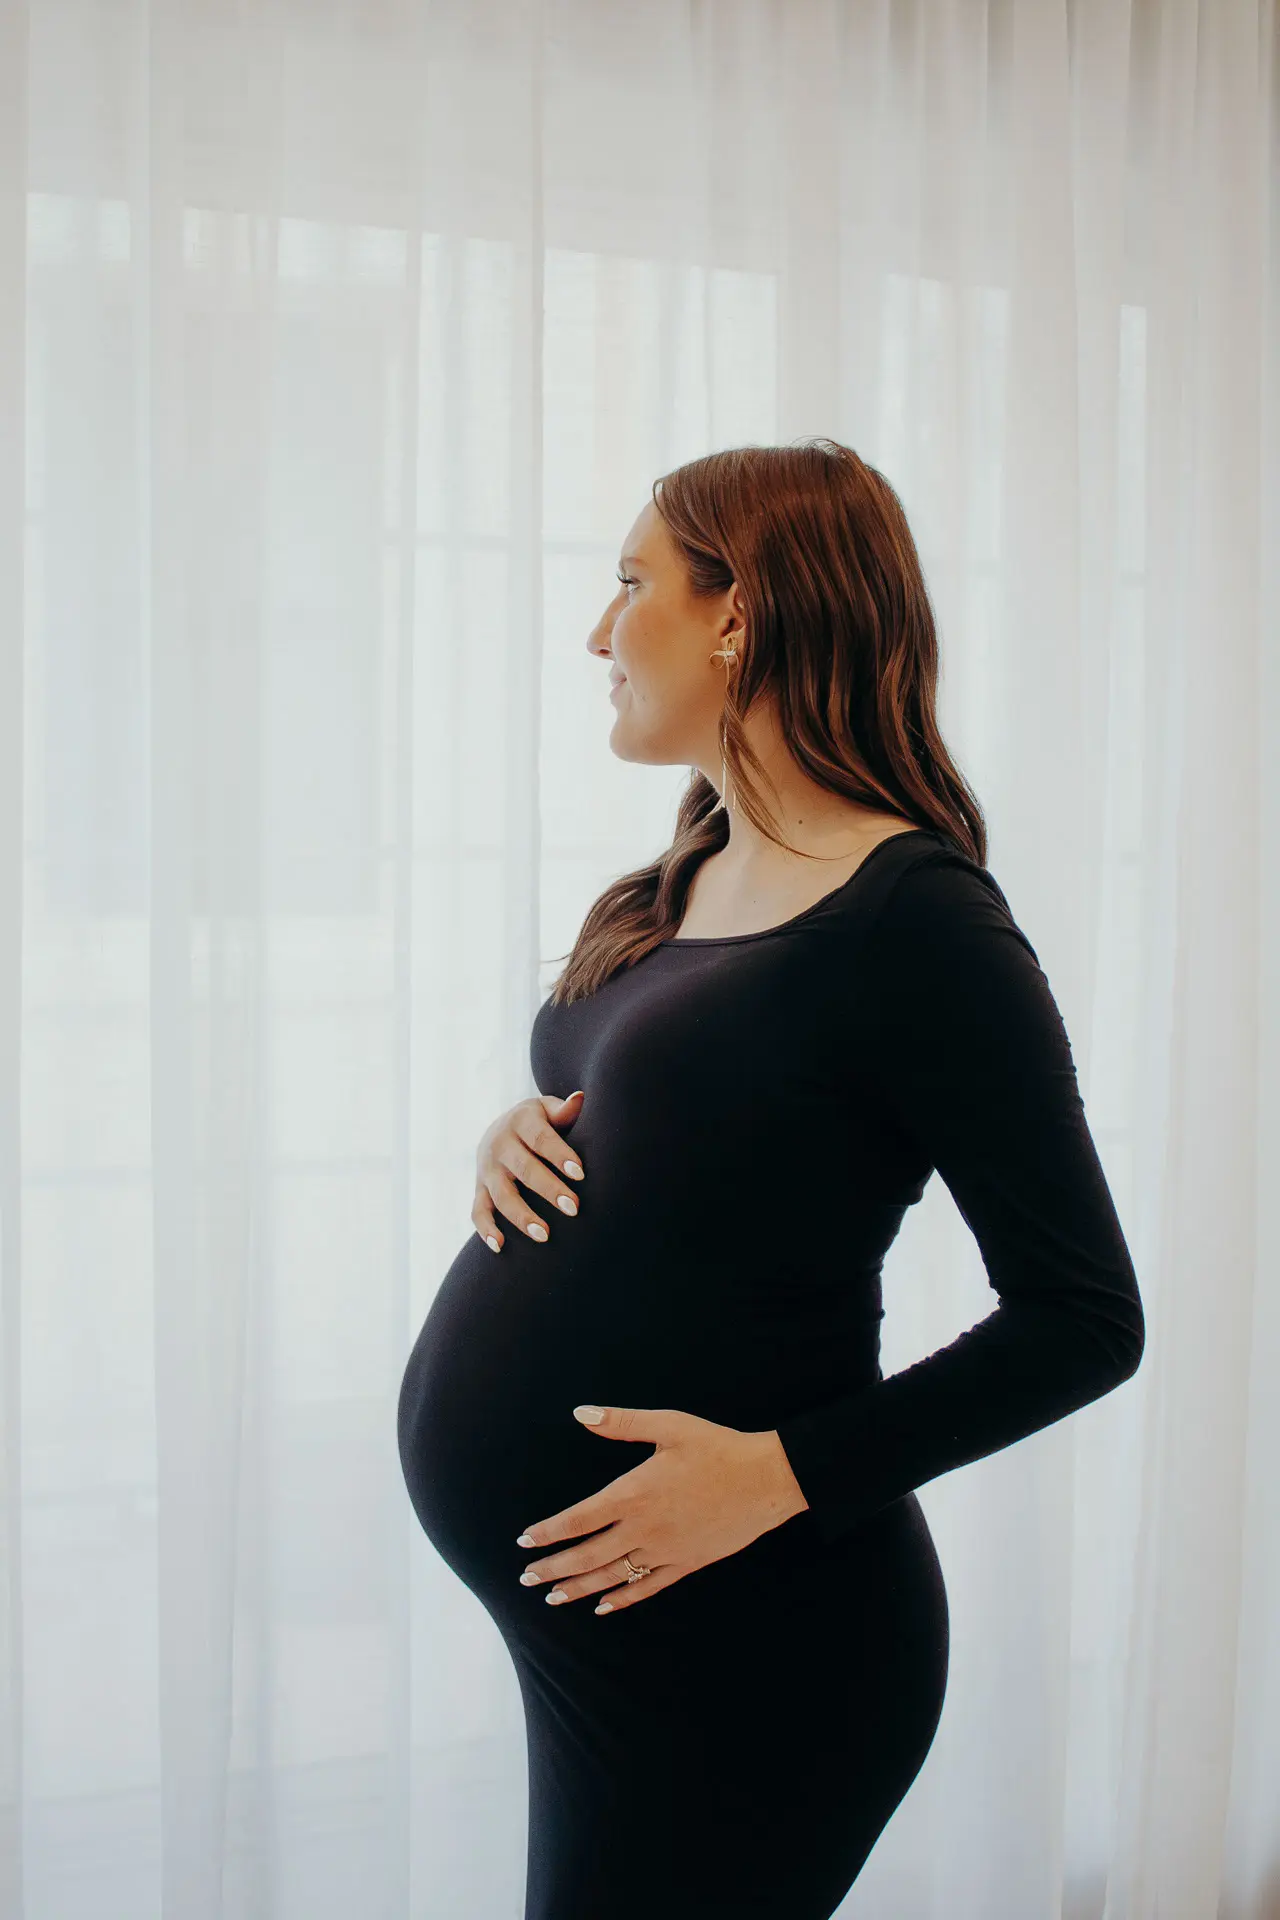 Pregnant woman with her hands on her baby bump looking outside